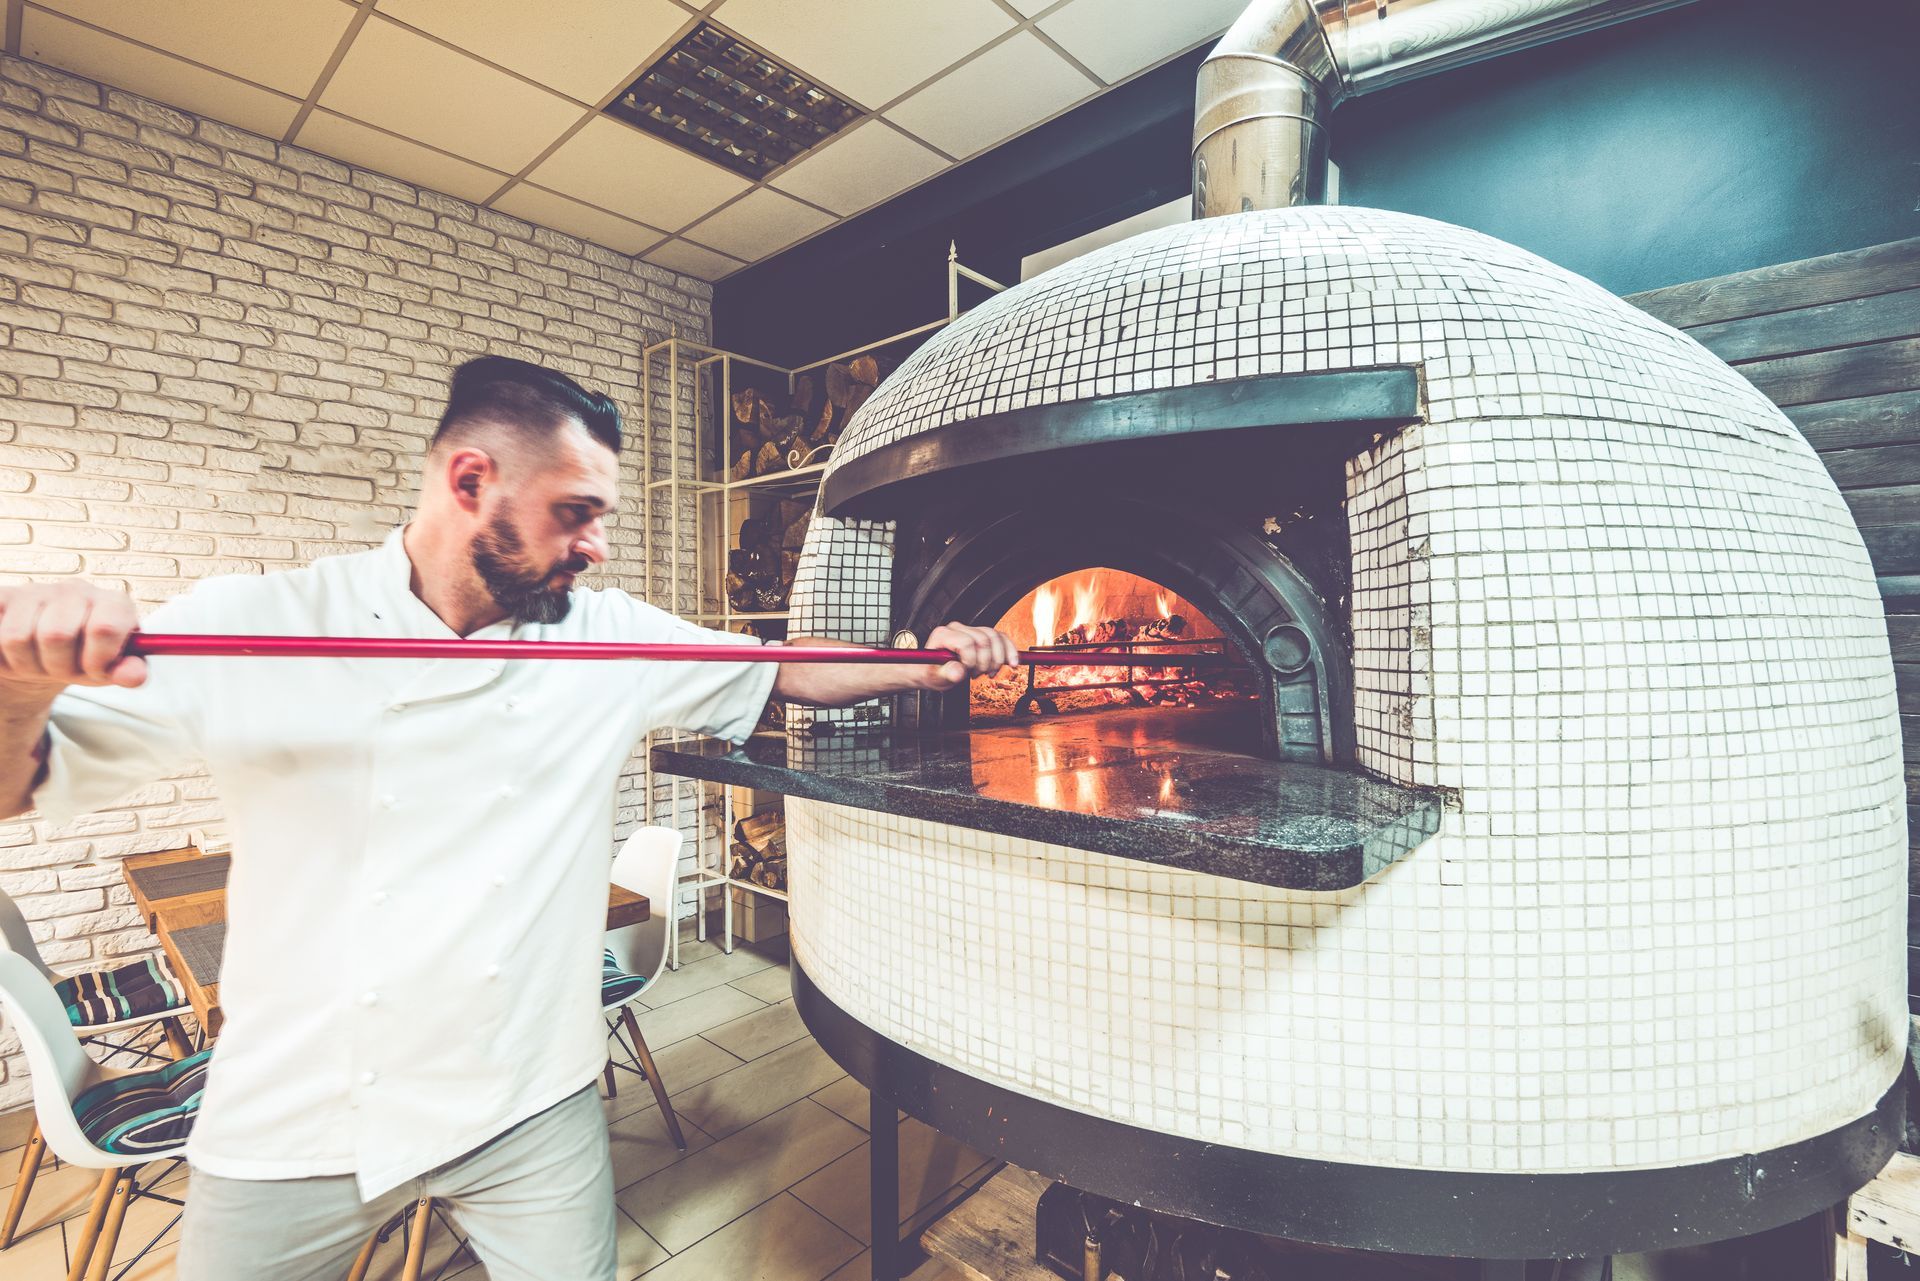 pizza chef in action at local pizzeria business